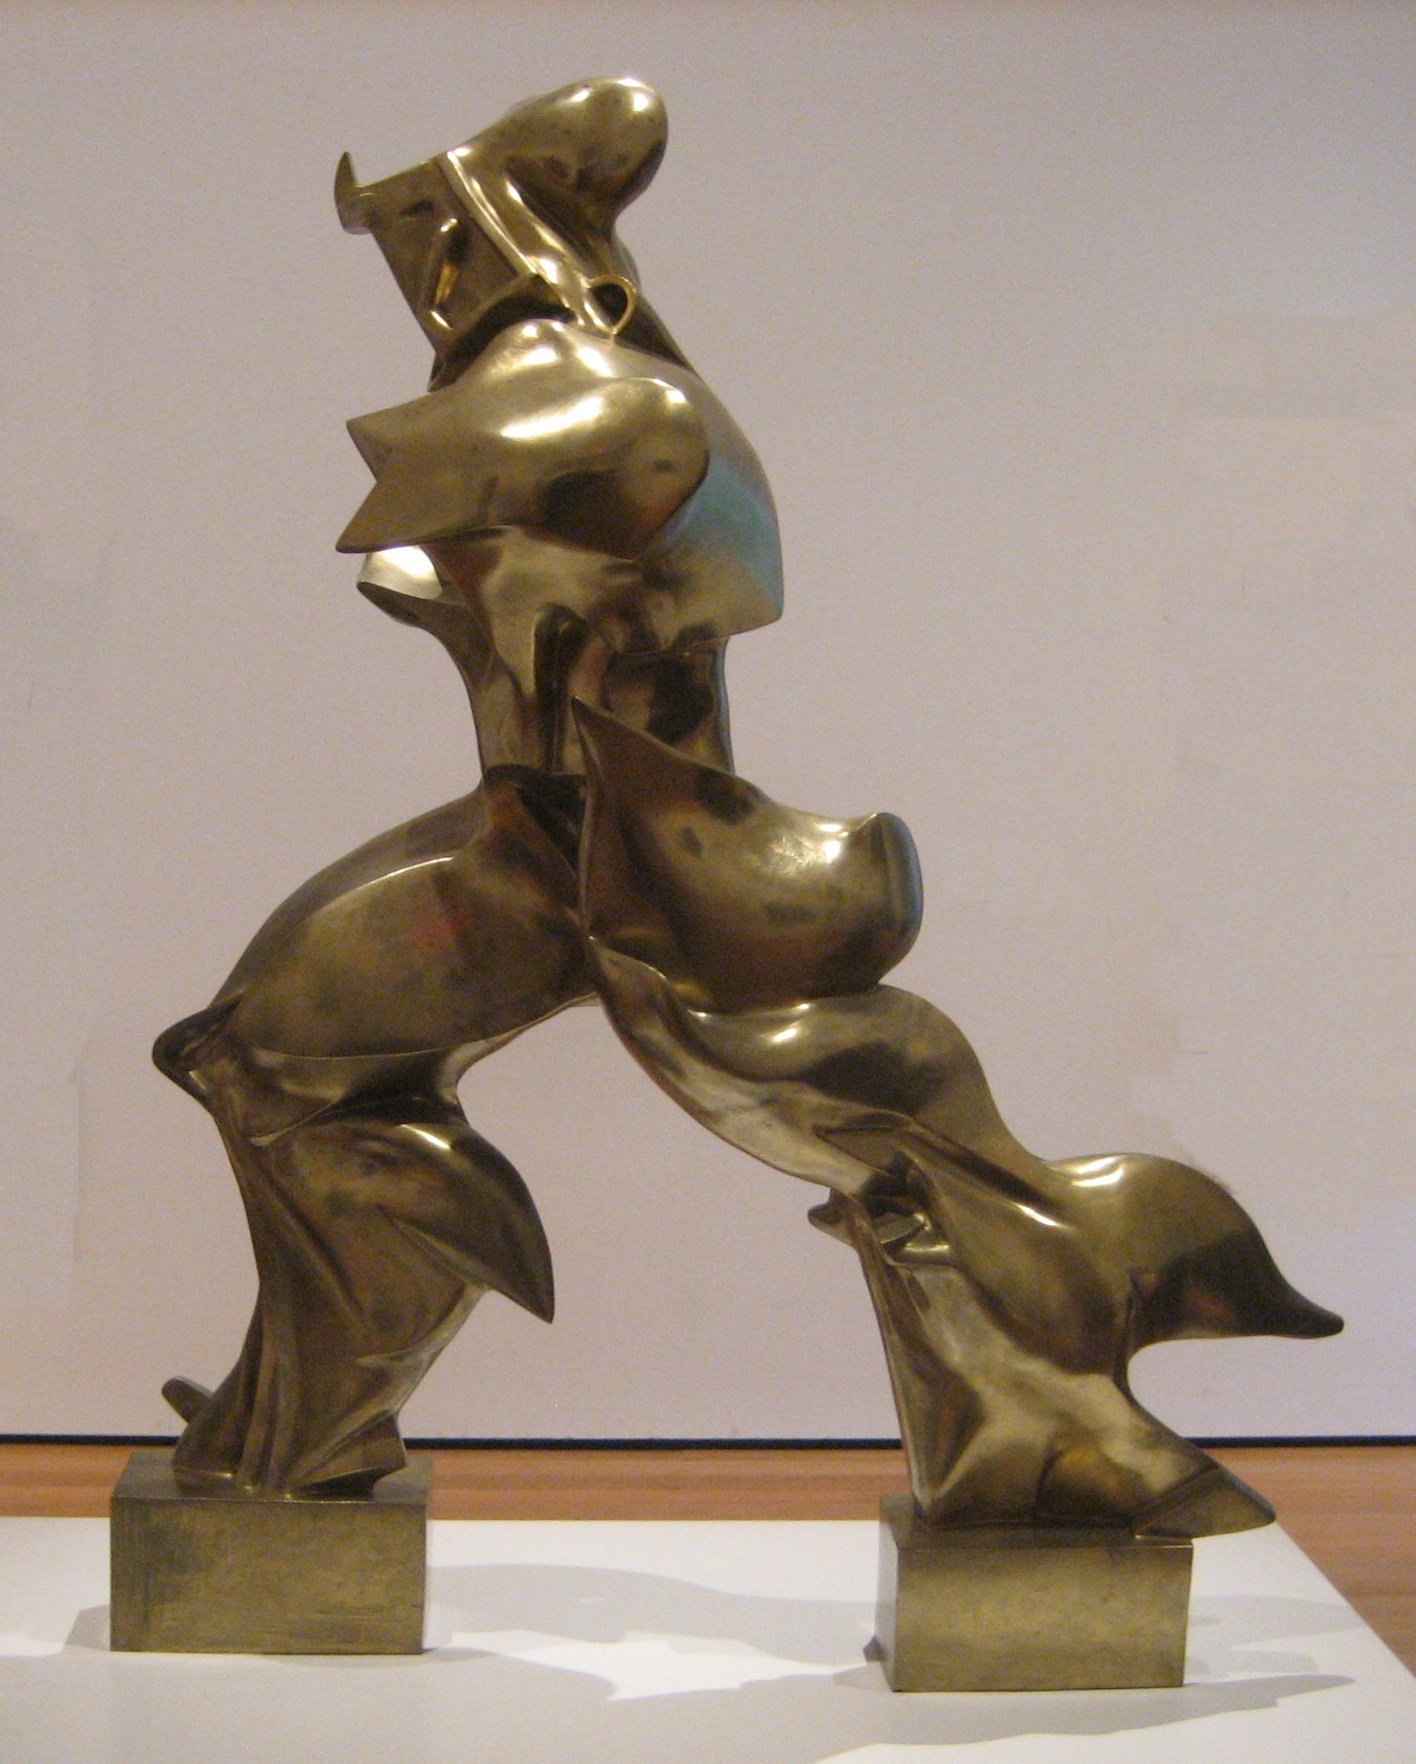 http://upload.wikimedia.org/wikipedia/commons/f/fd/%27Unique_Forms_of_Continuity_in_Space%27%2C_1913_bronze_by_Umberto_Boccioni